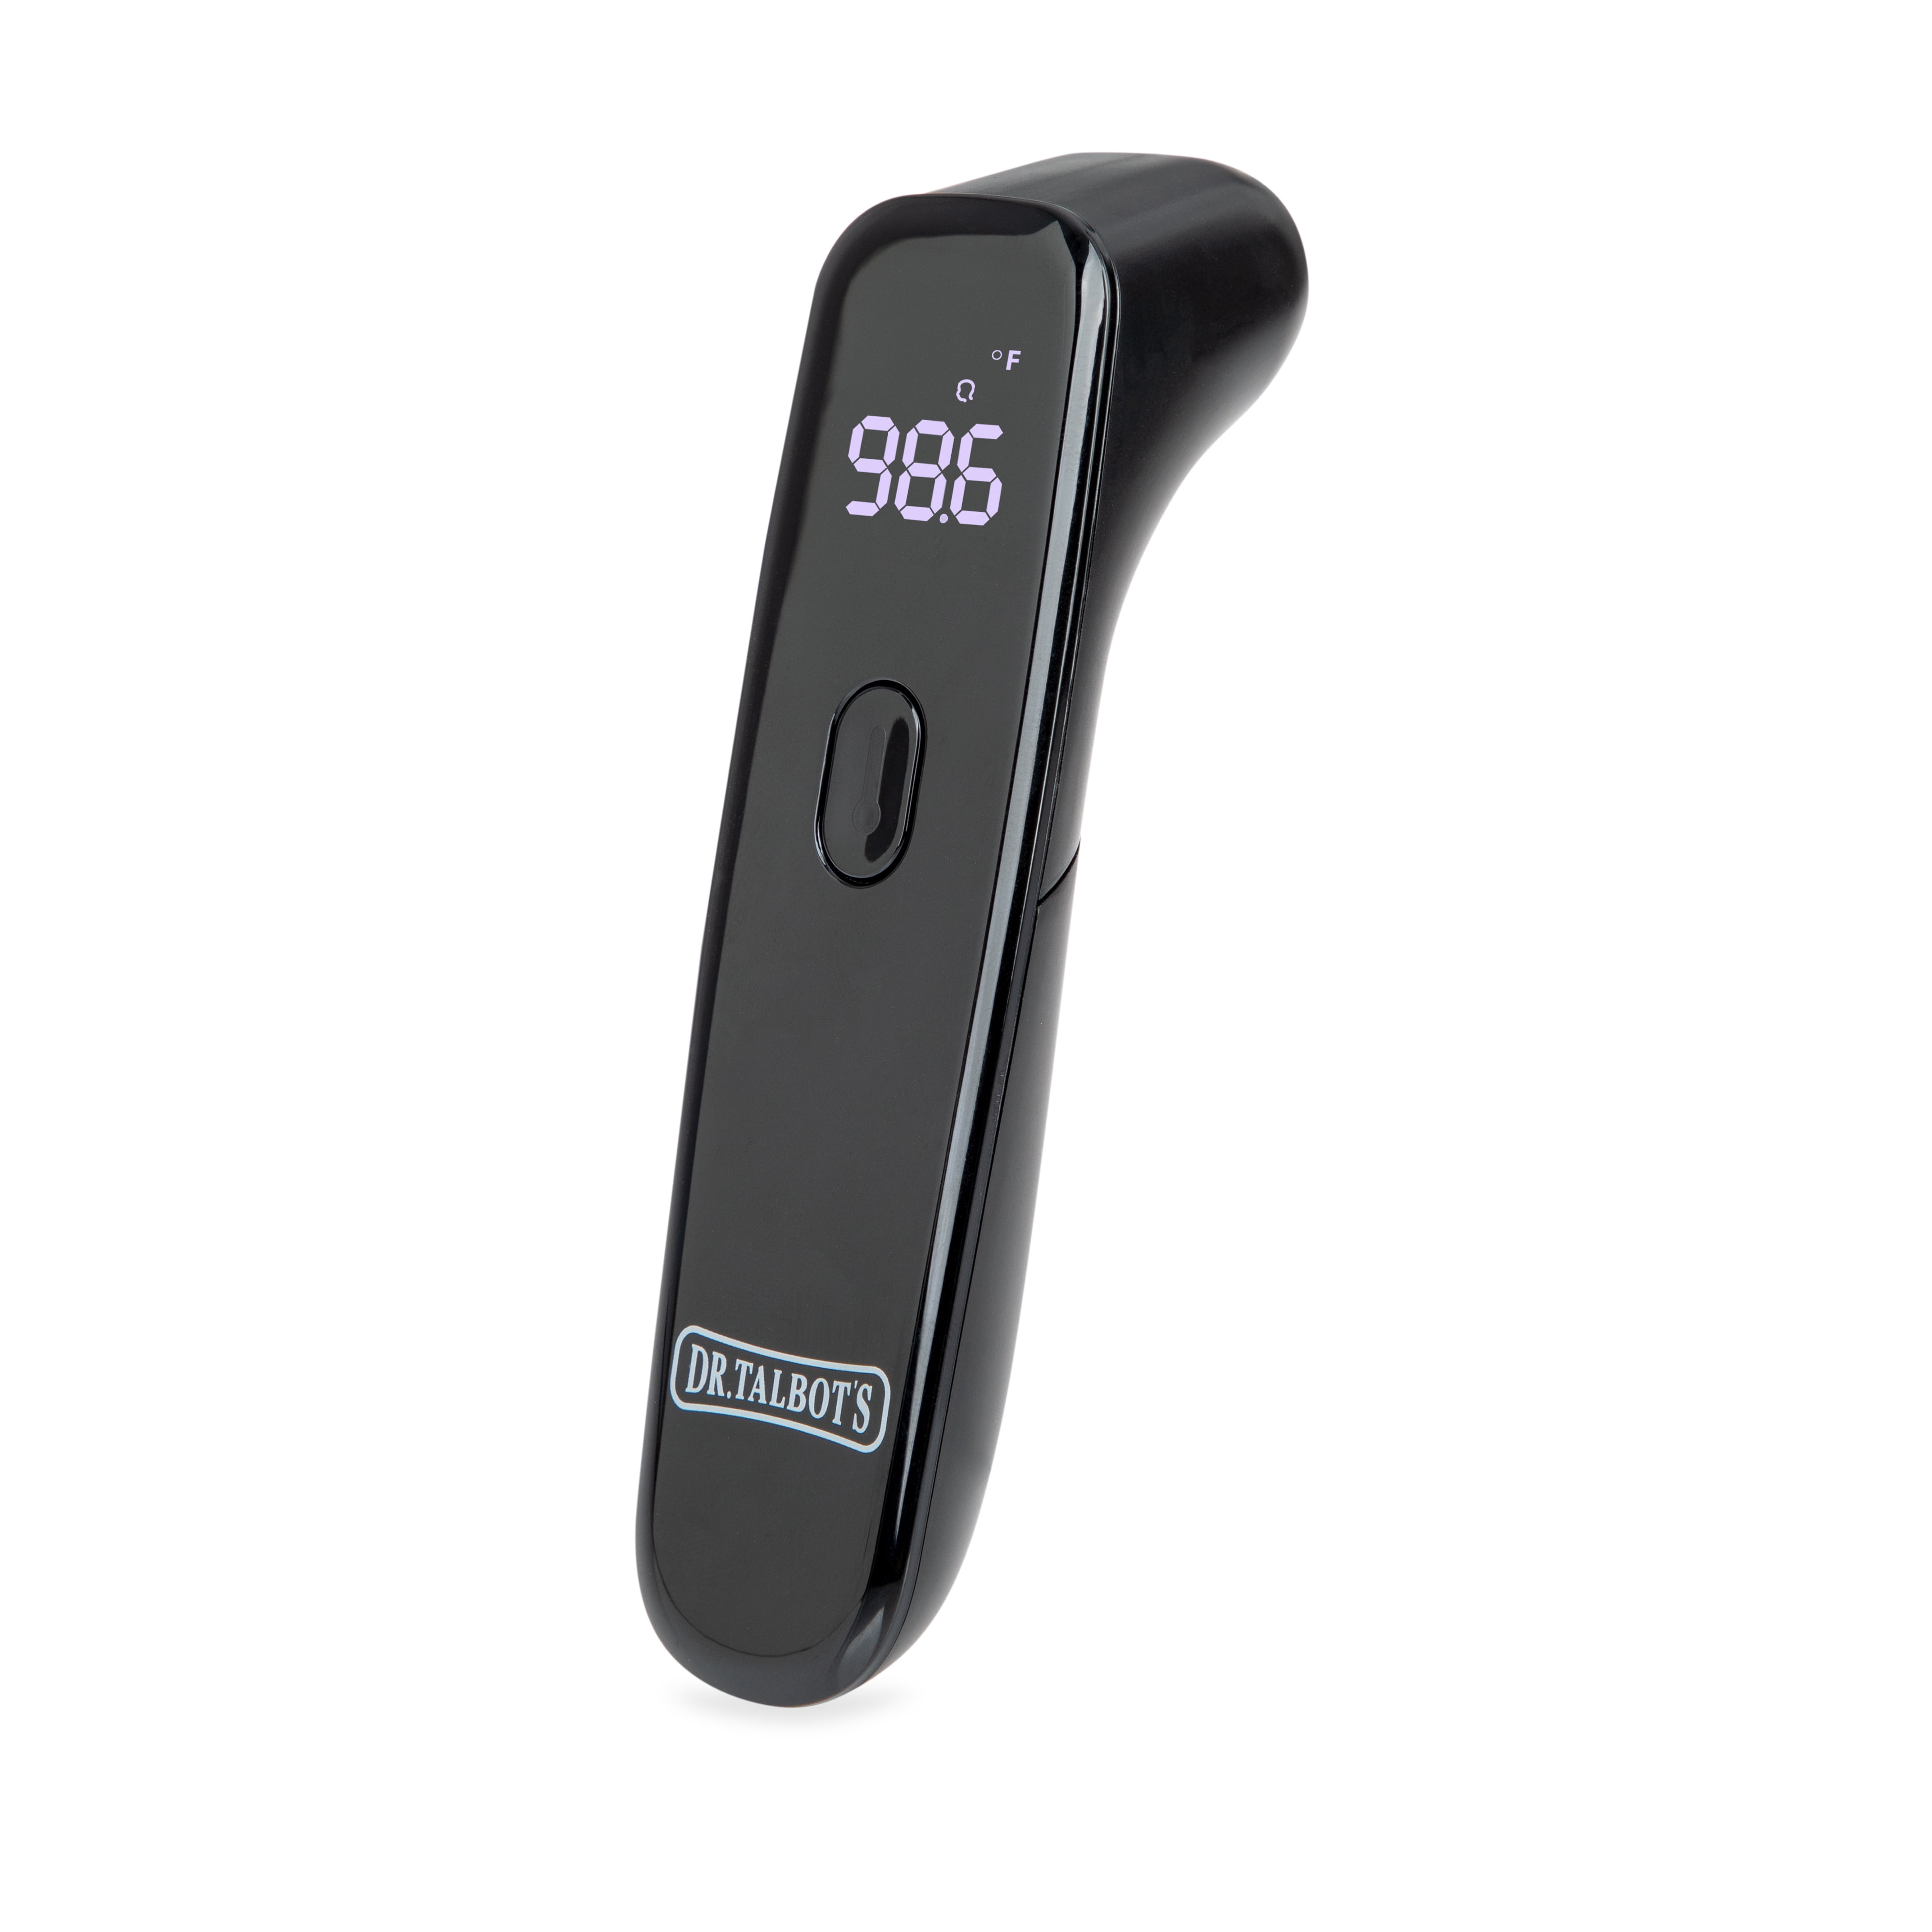 BBP 011: Interview with Ted Conrad of Fireboard Smart Thermometer